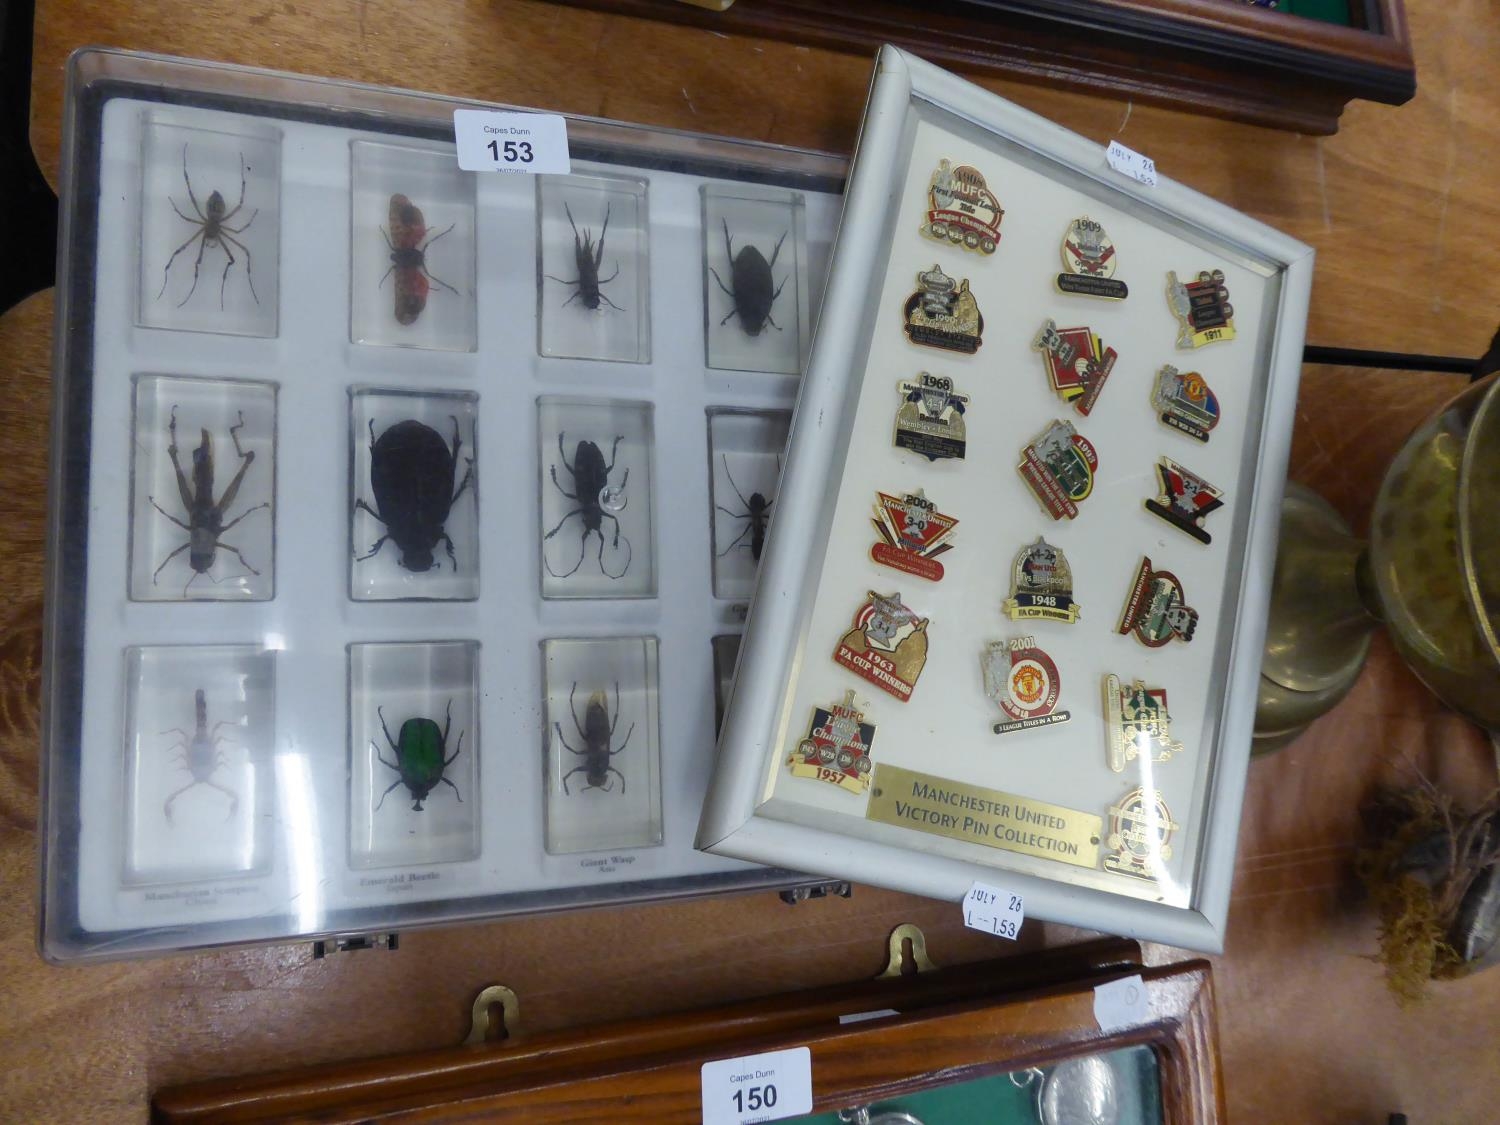 17 VARIOUS MANCHESTER UNITED VICTORY PINS, IN FRAME, AND 15 RESIN INSECT SPECIMEN PAPERWEIGHTS IN